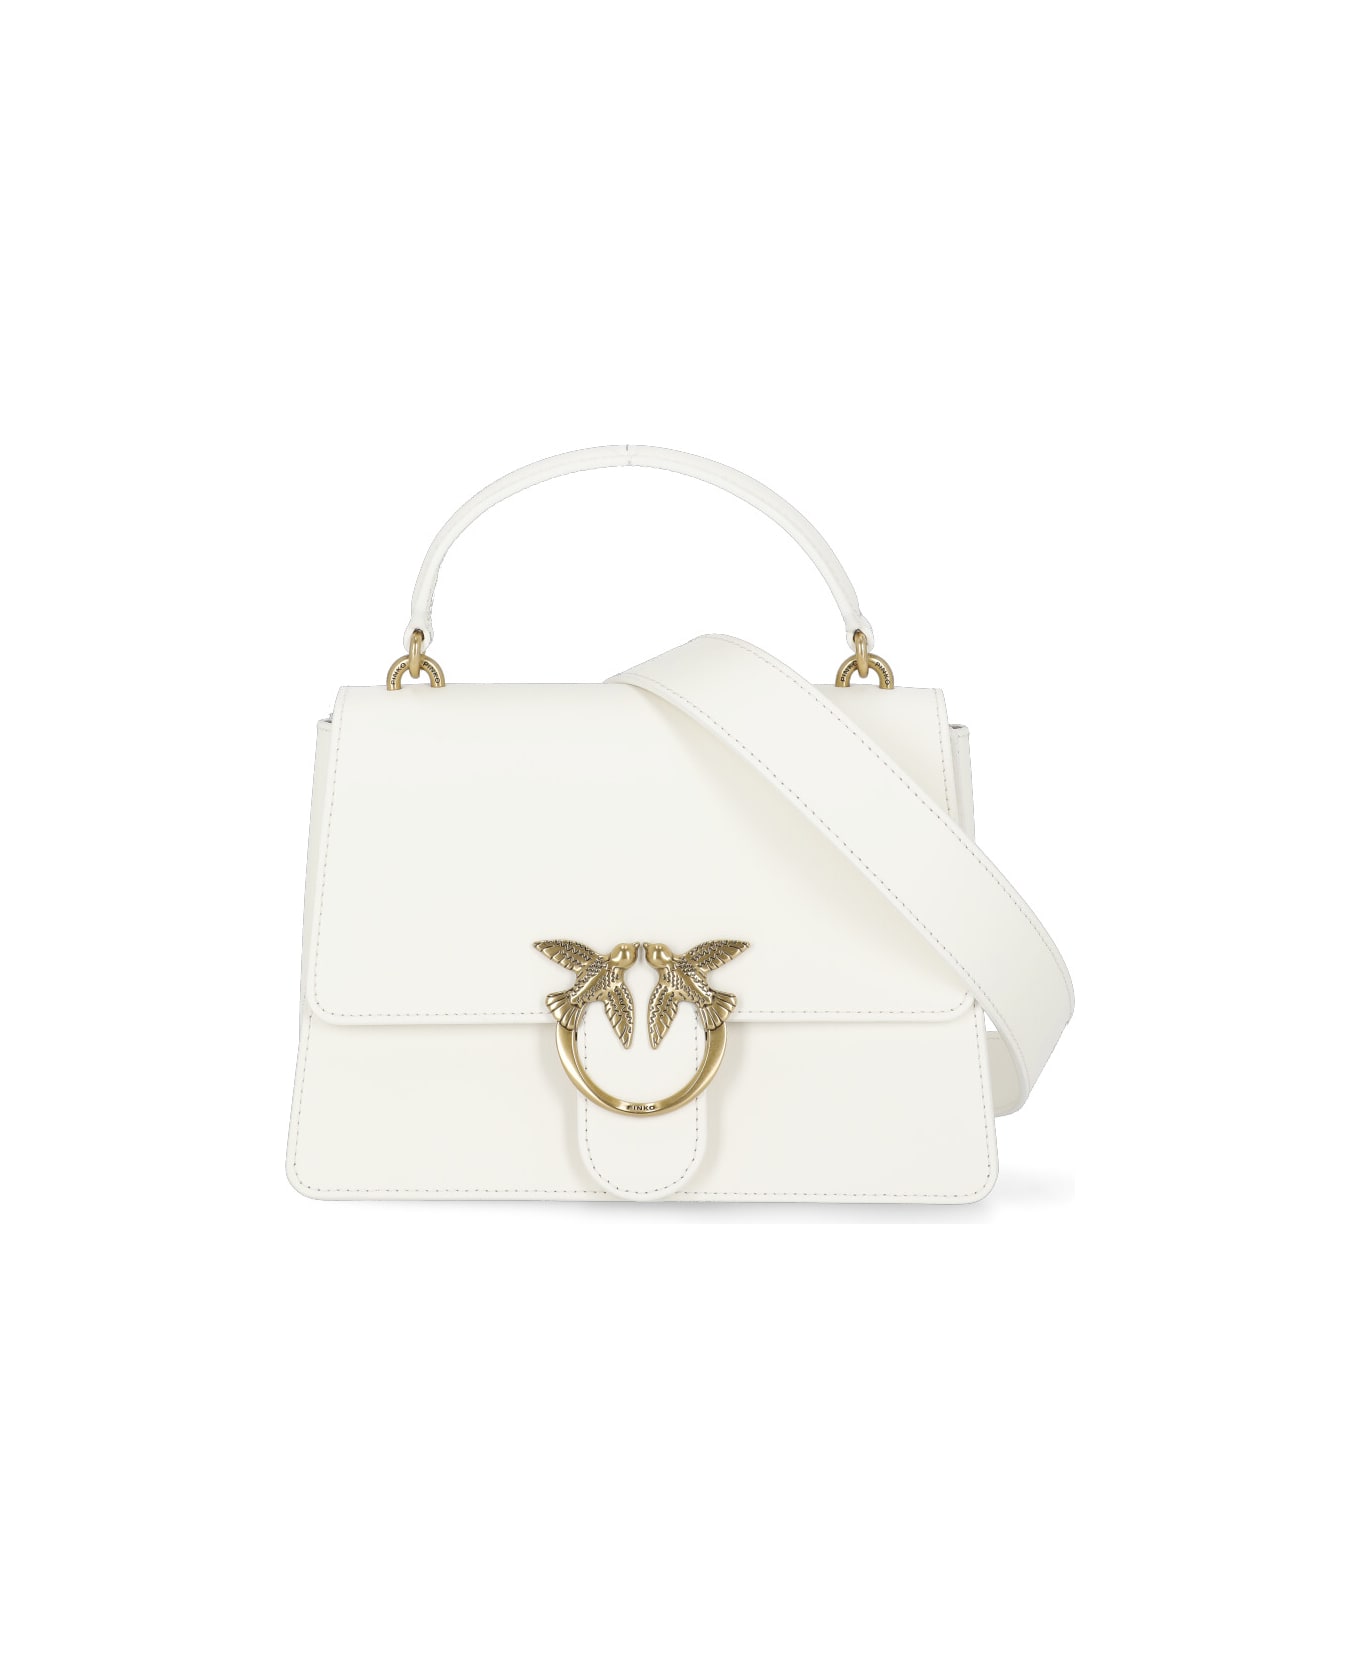 Pinko Love One Top Handle Tote - White トートバッグ